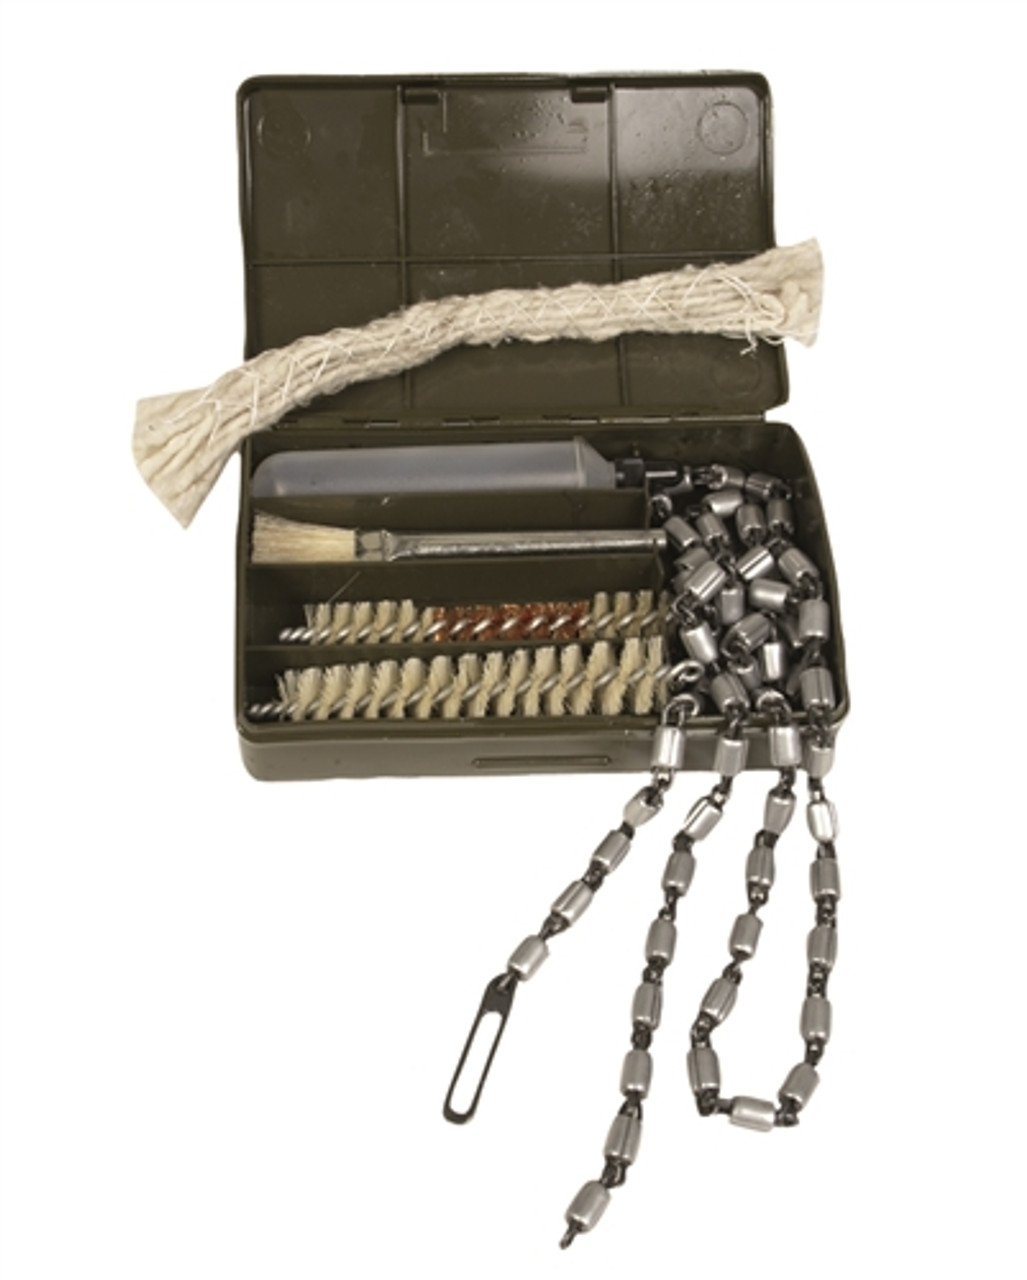 German G3 Rifle Cleaning Kit from Hessen Antique